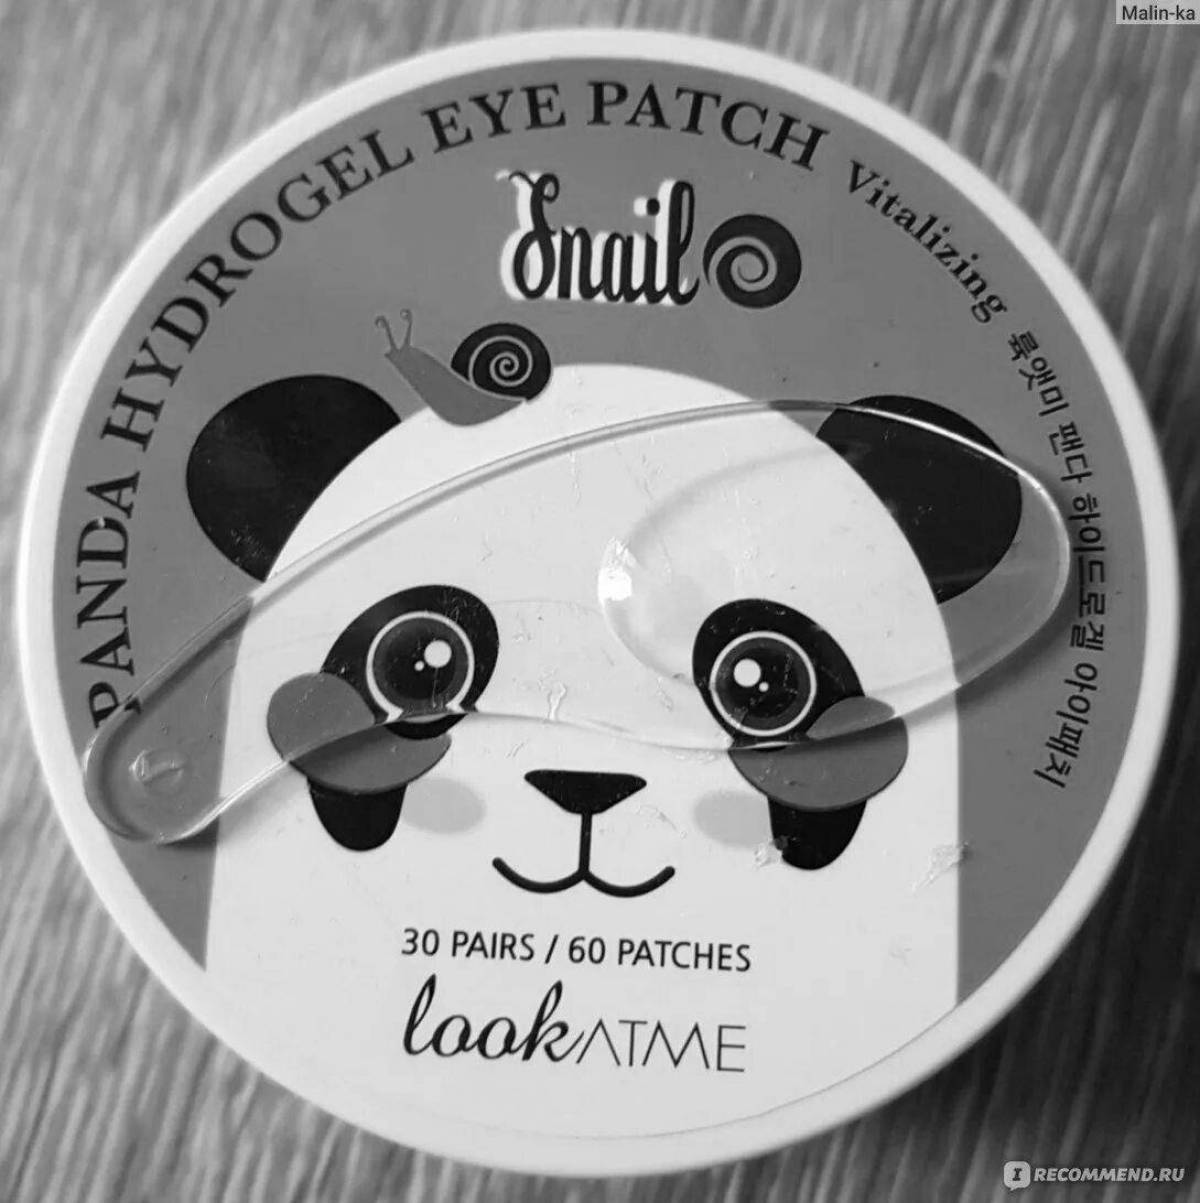 Eye patches #10